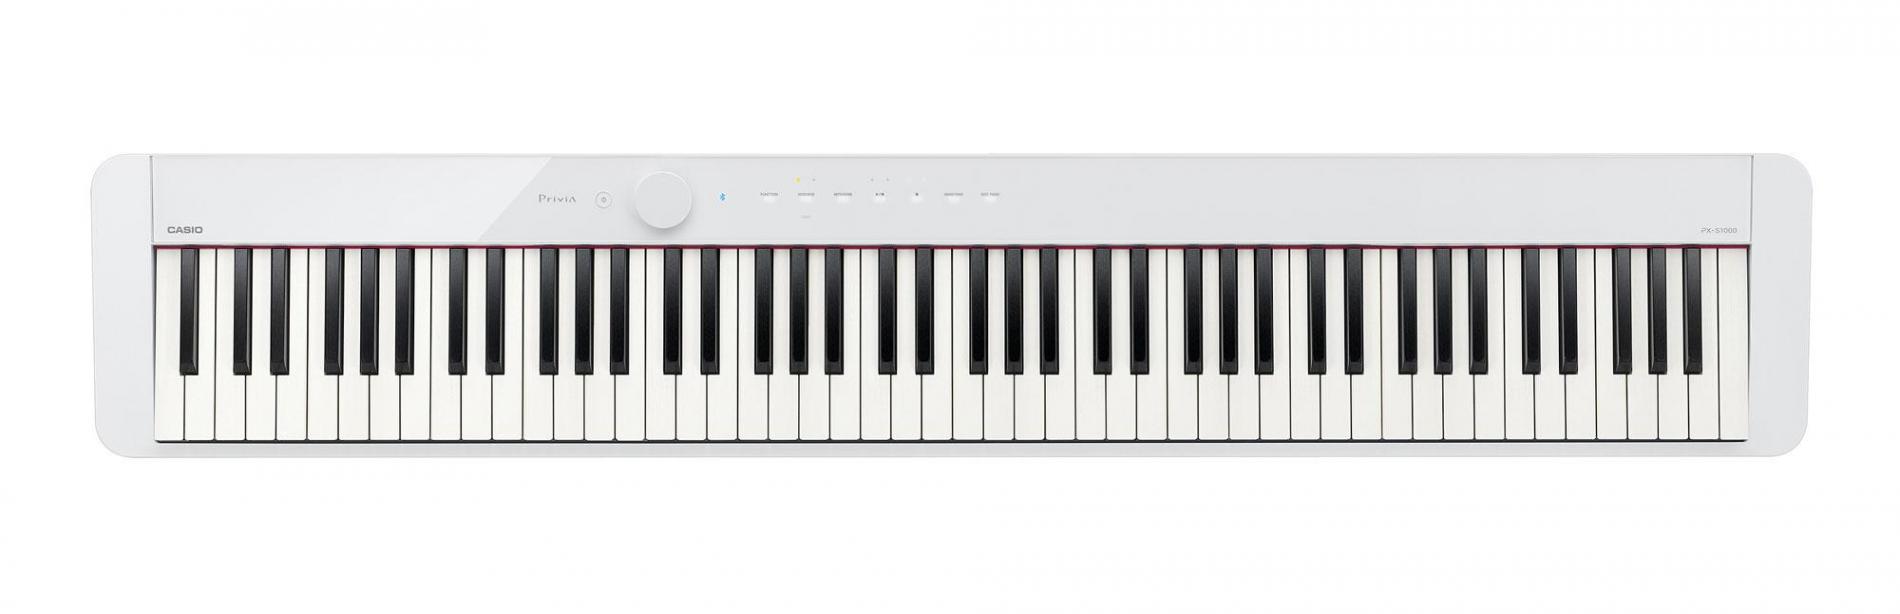 PX-S1000WE Privia Stagepiano